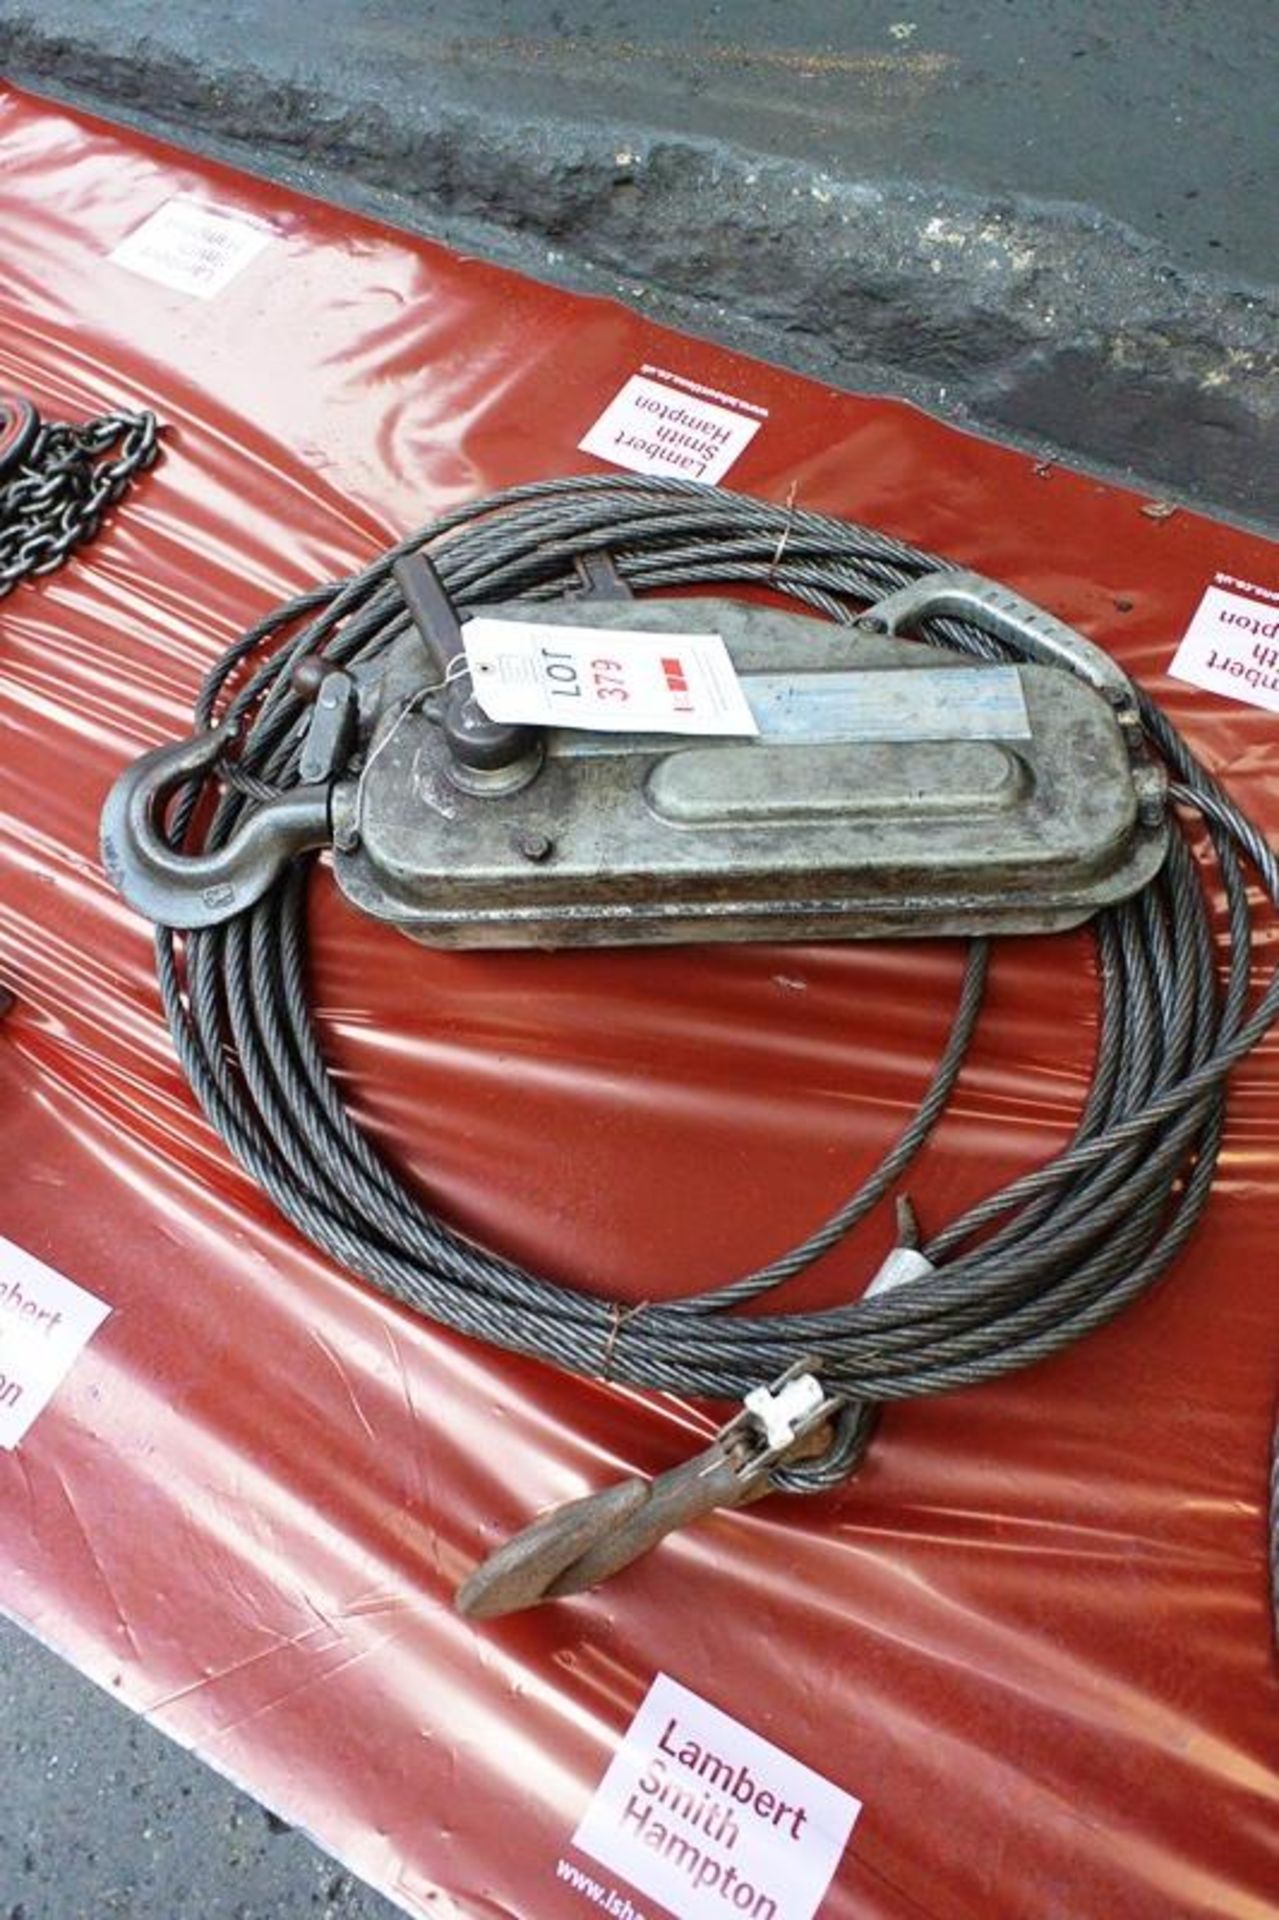 Tirfor wire cable pulling system, model TU16 (Recommended collection period for this lot Wednesday